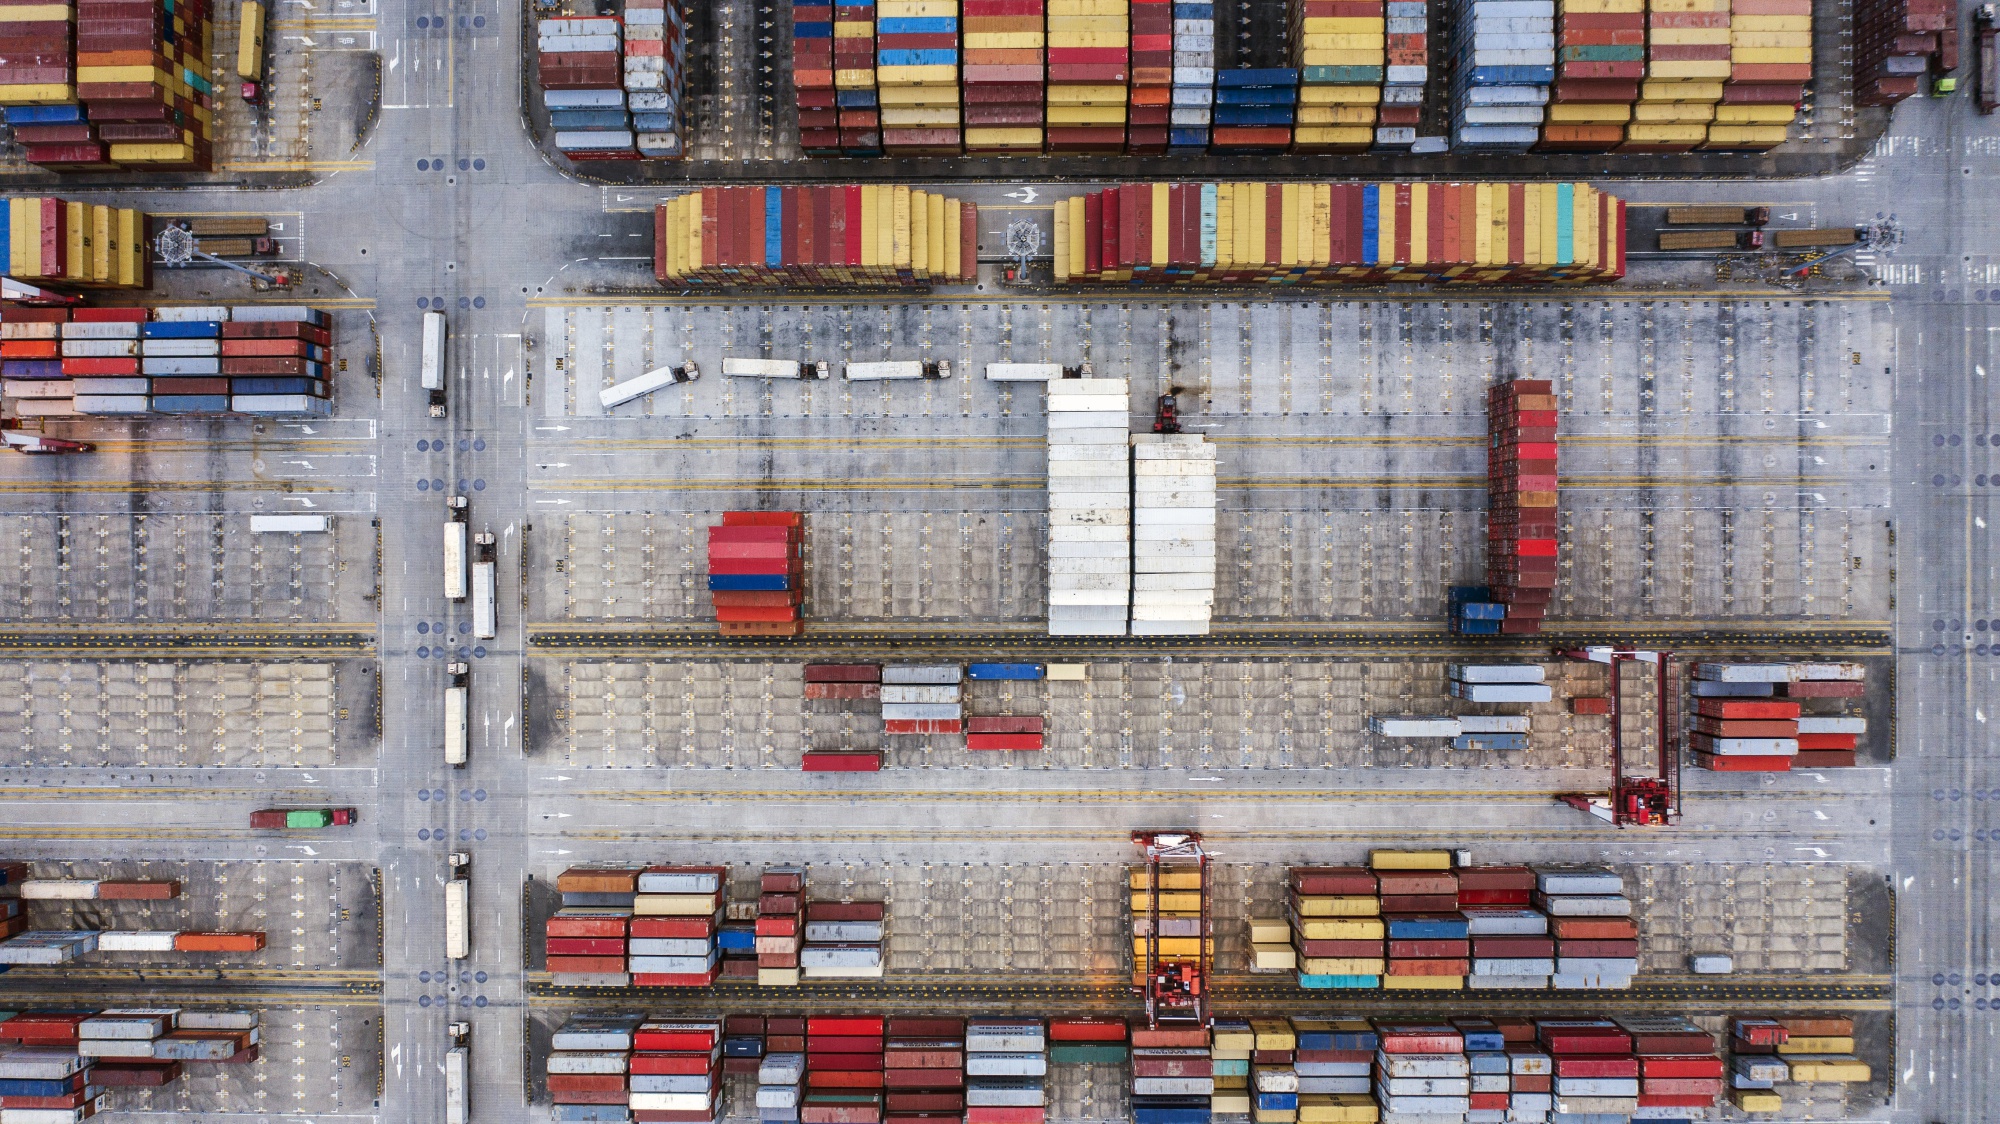 Shipping containers sit stacked at the Yangshan Deepwater Port, operated by Shanghai International Port Group Co. (SIPG), in this aerial photograph taken in Shanghai, China, on Friday, May 10, 2019.&nbsp;